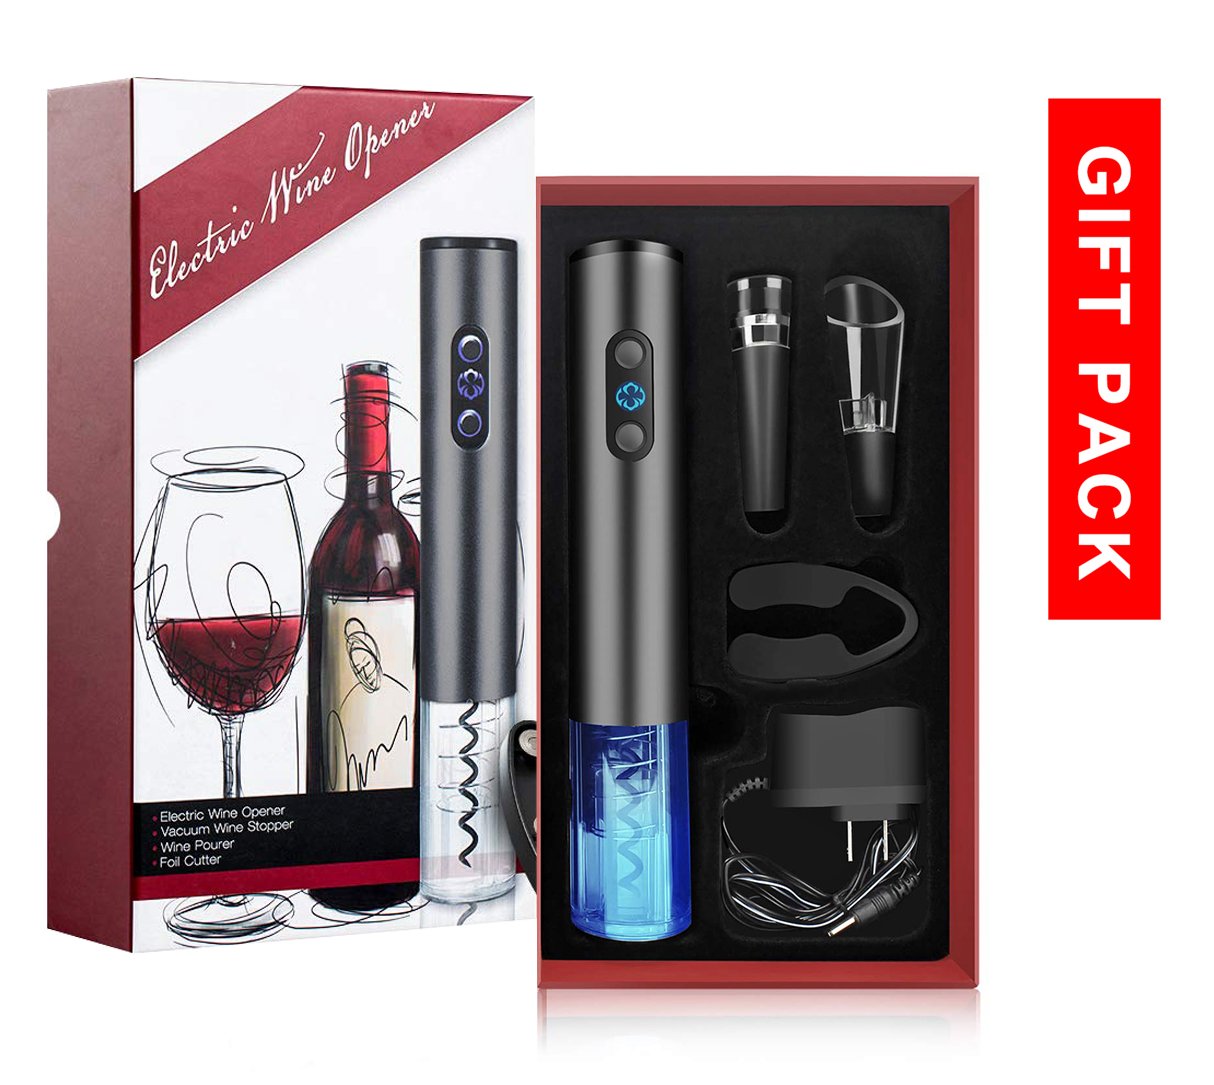 Hytx Rechargeable Electric Wine Opener Set With Charger Cordless